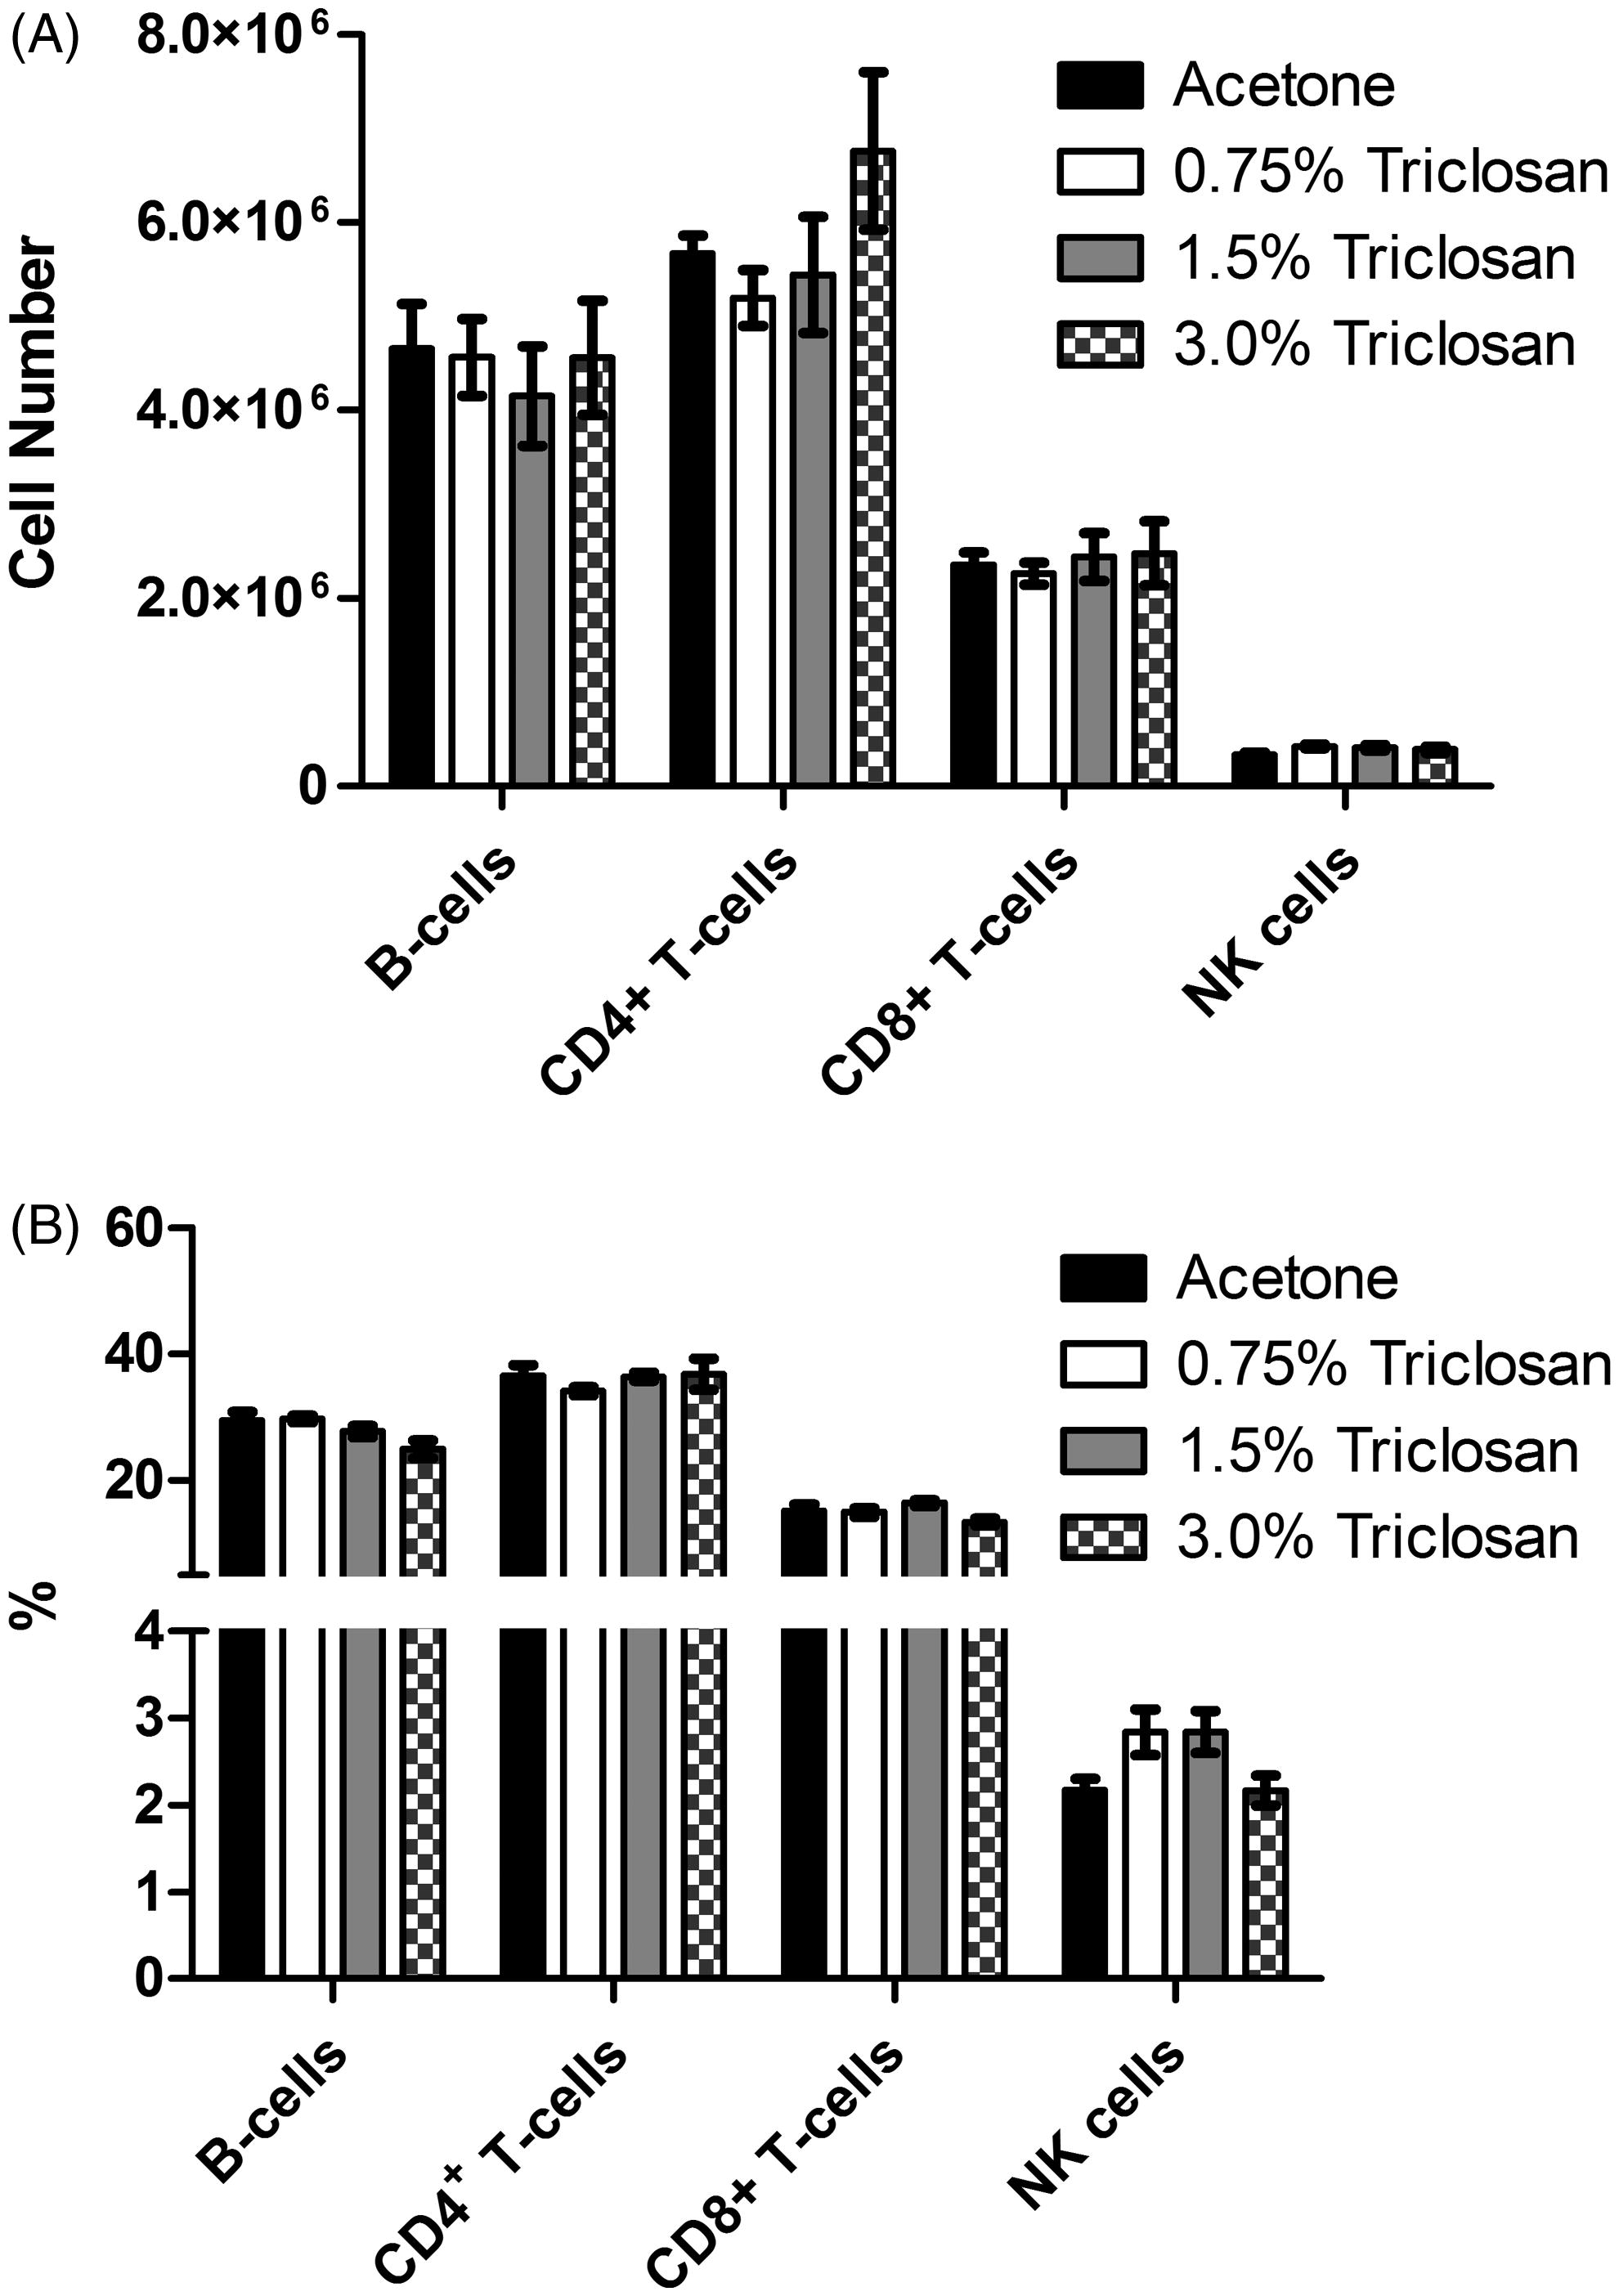 Figure 5. Effects of dermal exposure to triclosan for 28 days on splenocyte populations. Effects of dermal exposure to triclosan for 28 days on (A) total cell number and (B) frequency of lymphocyte subpopulations in female B6C3F1 mice. Numbers of B-cells, CD4+ and CD8+ T-cells, dendritic cells and NK cells were enumerated using flow cytometry. Values shown are means (±SE) for each group.